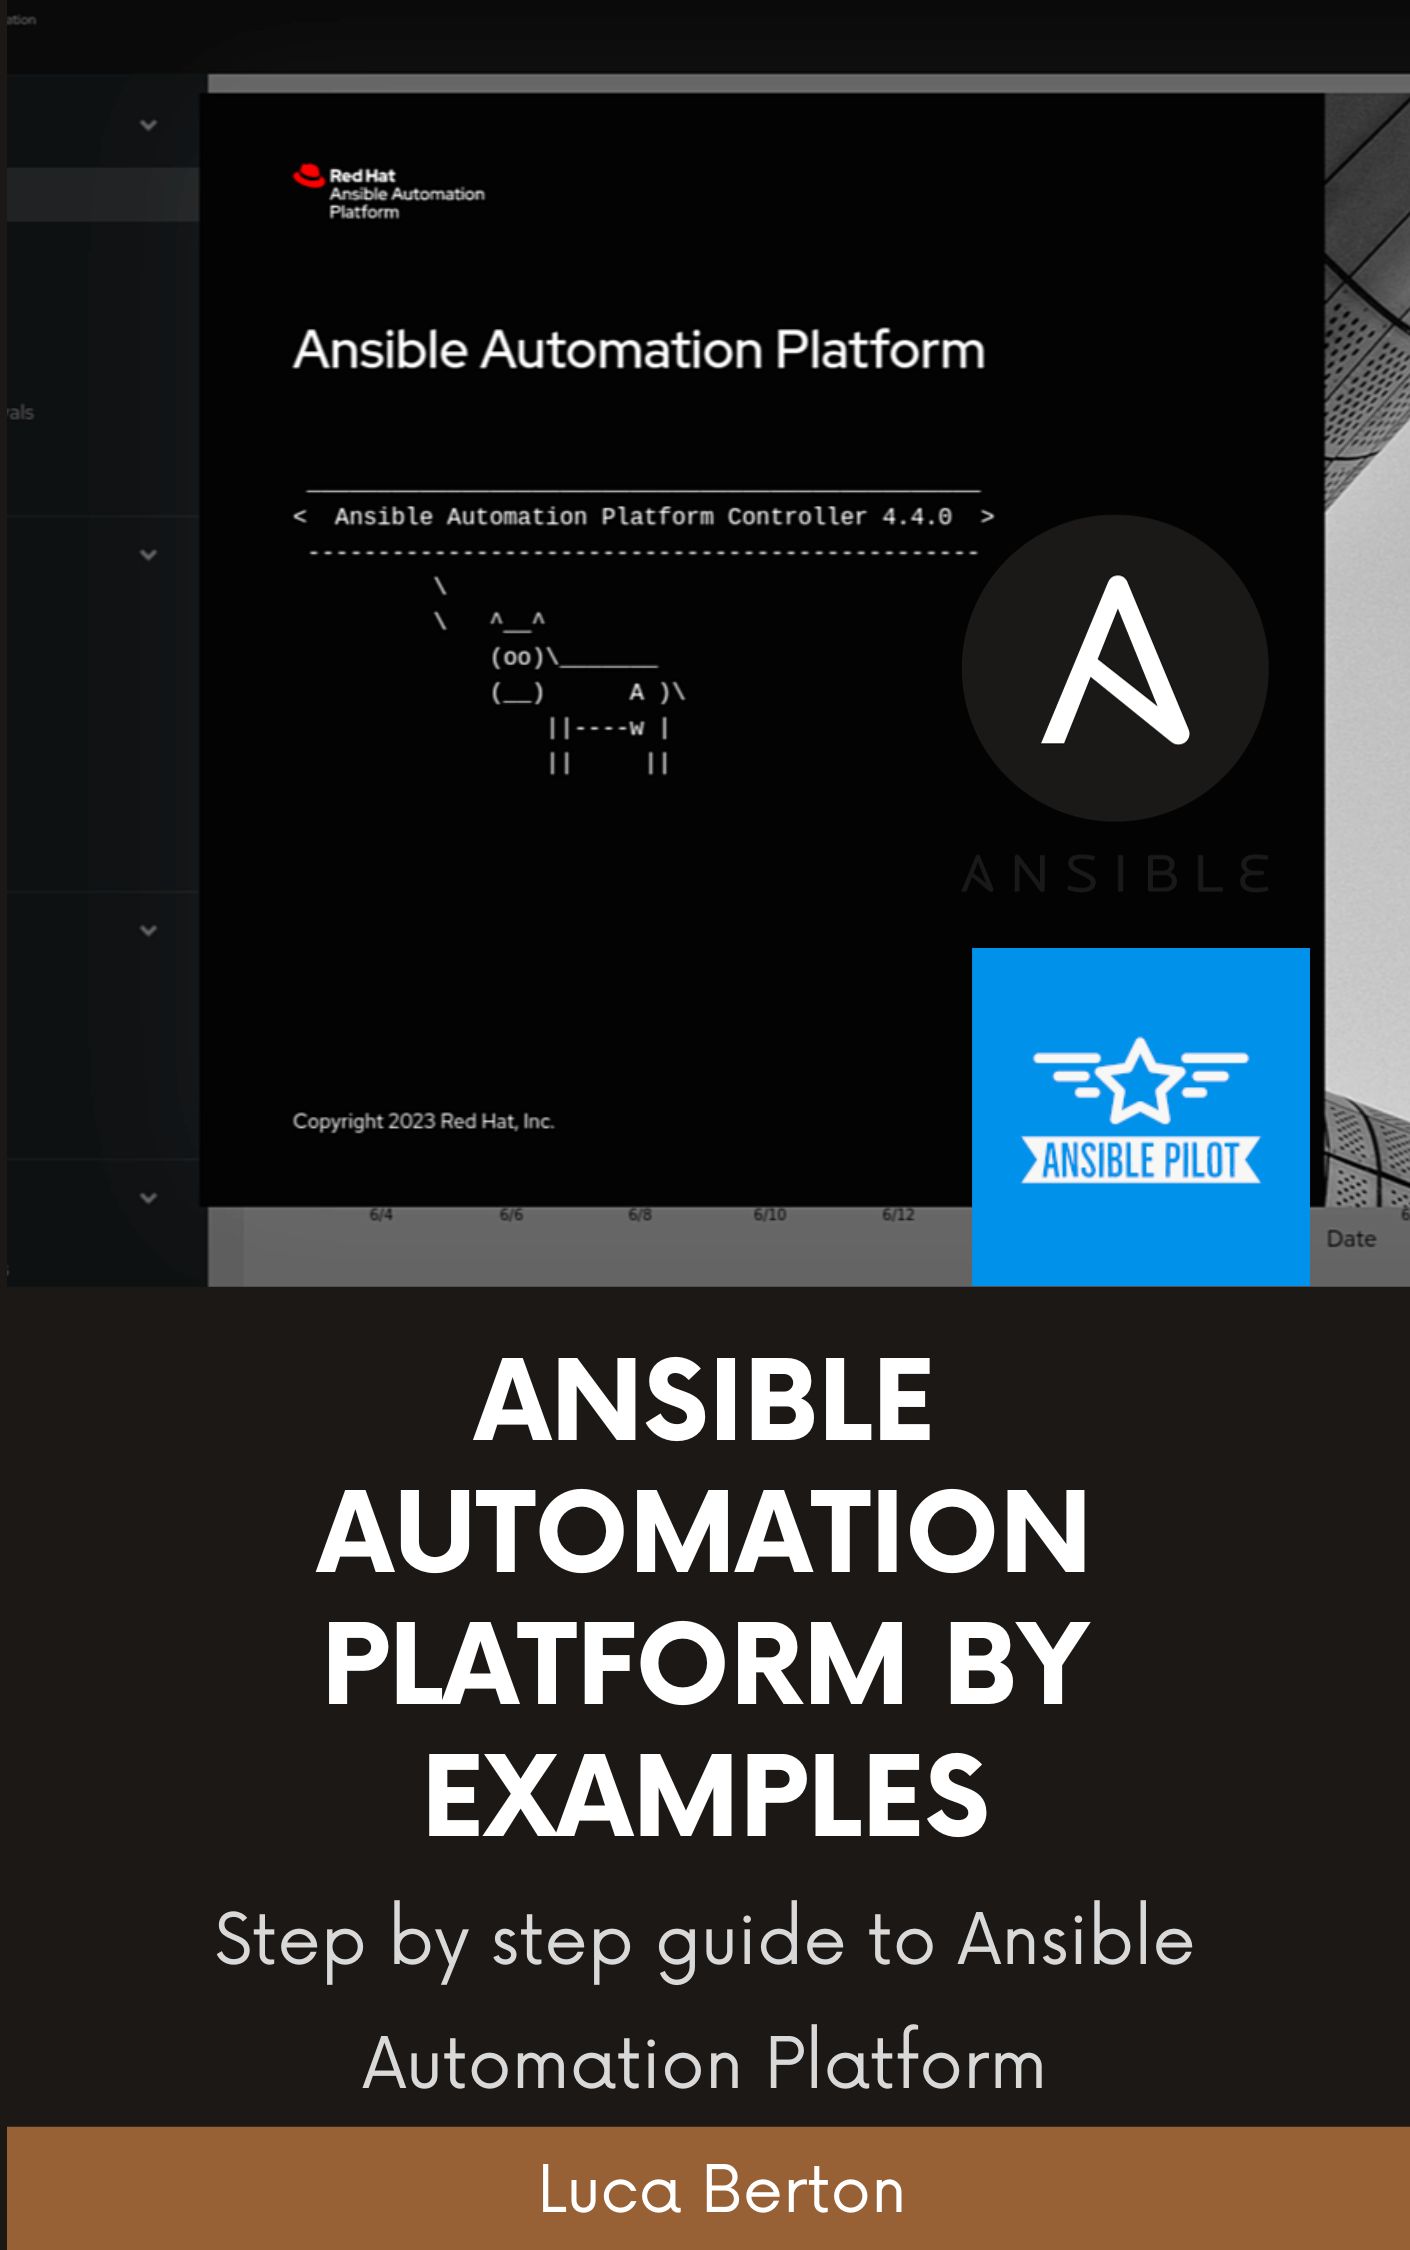 Ansible Automation Platform By Example: A step-by-step guide for the most common user scenarios